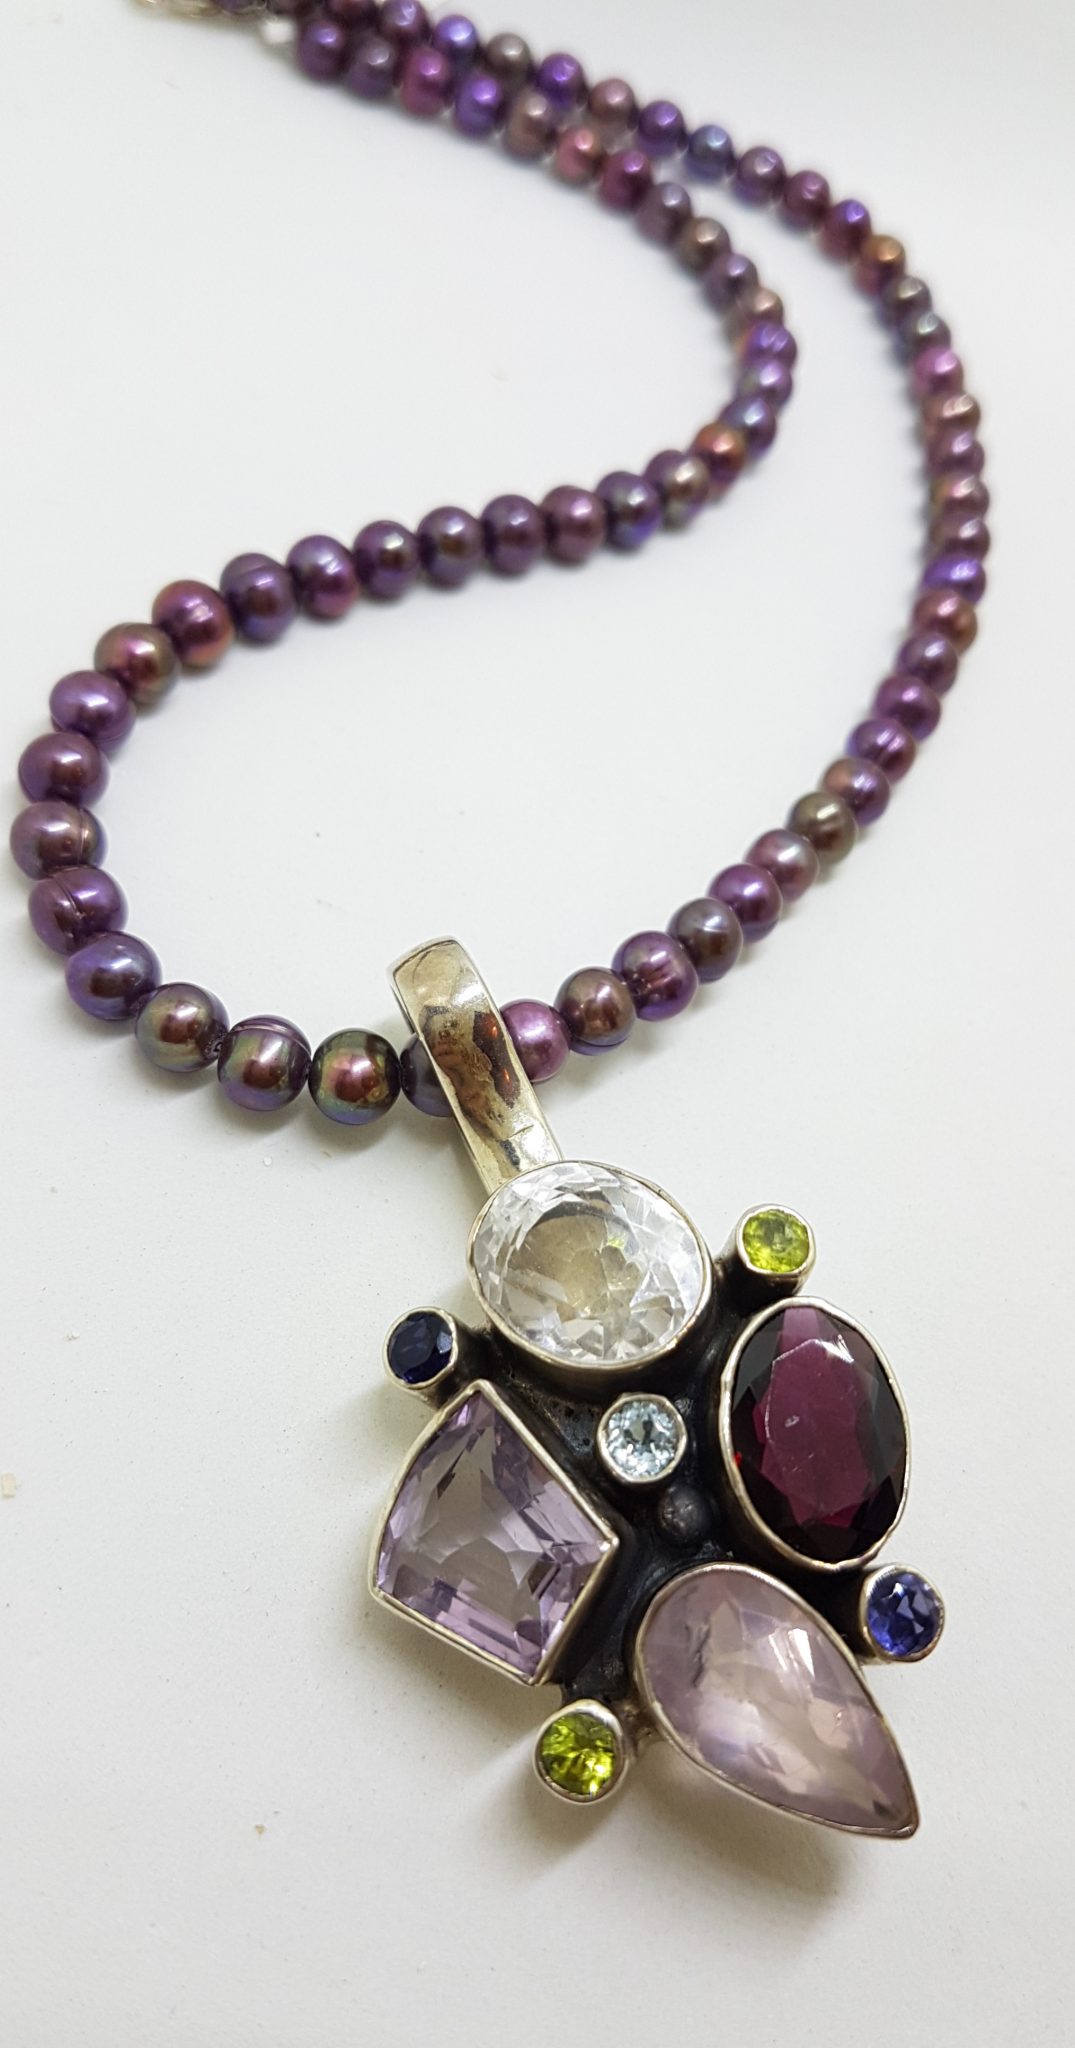 Moon Pendant Necklace with Amethyst and Garnet - Peaceful Evening | NOVICA